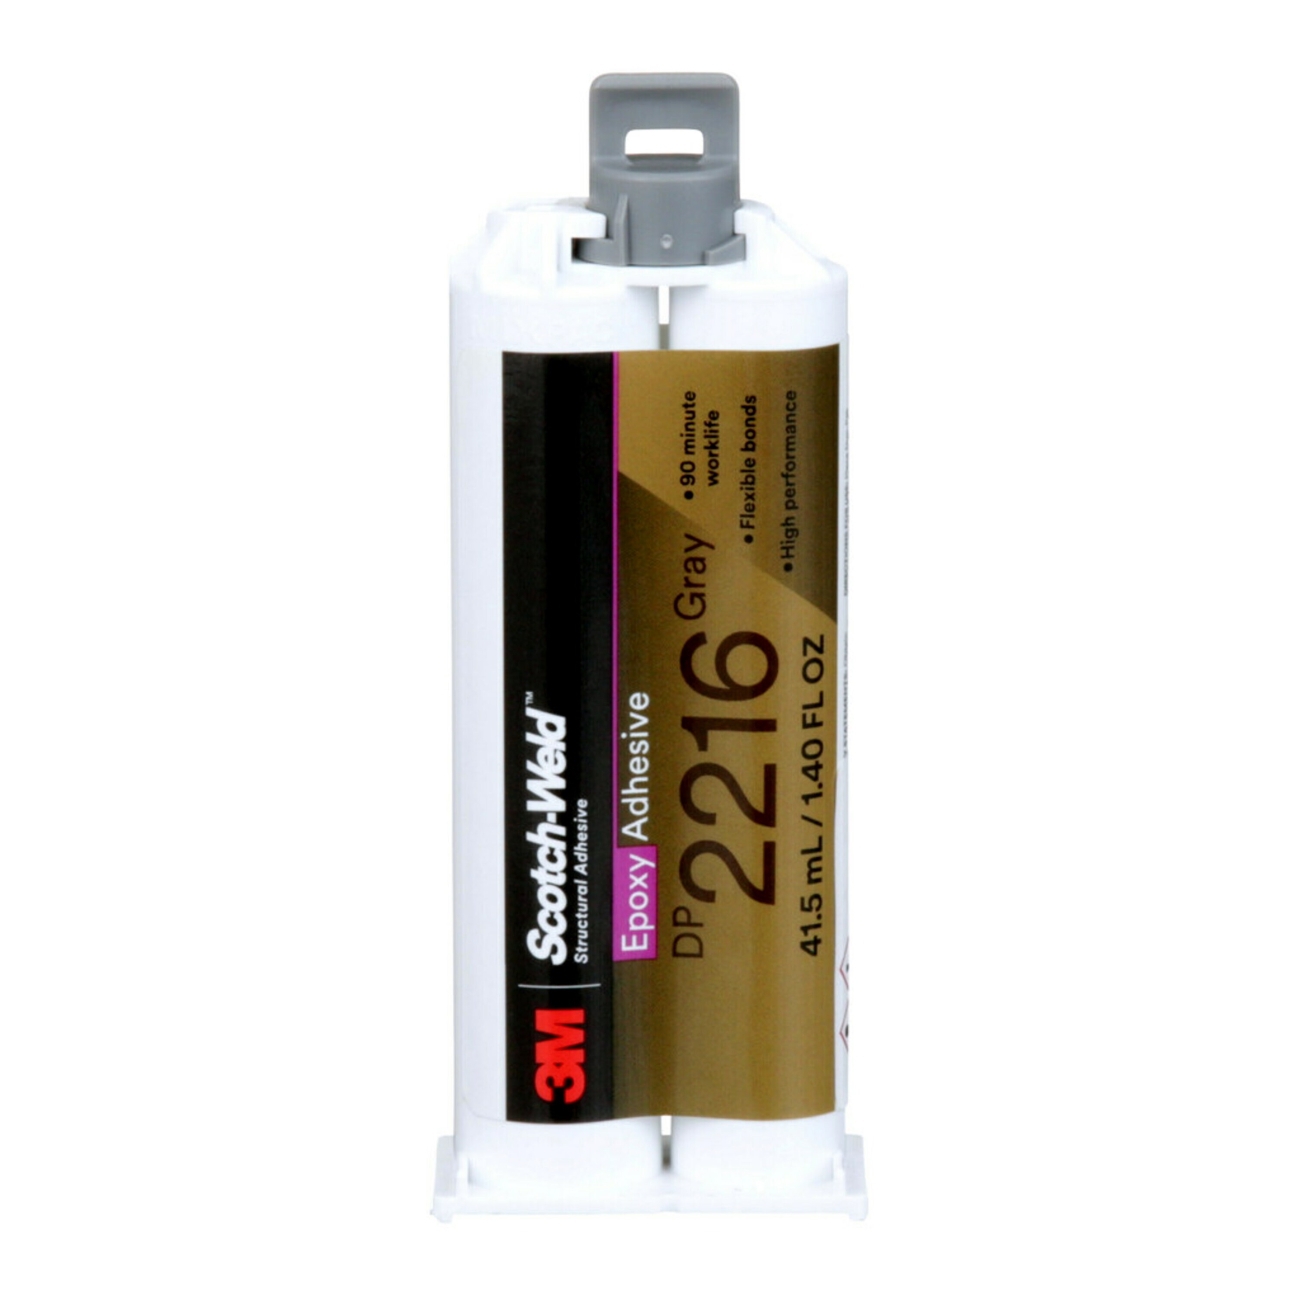 3M Scotch-Weld 2-component construction adhesive based on epoxy resin 2216 B/A, for the EPX system, gray, 41.5 ml